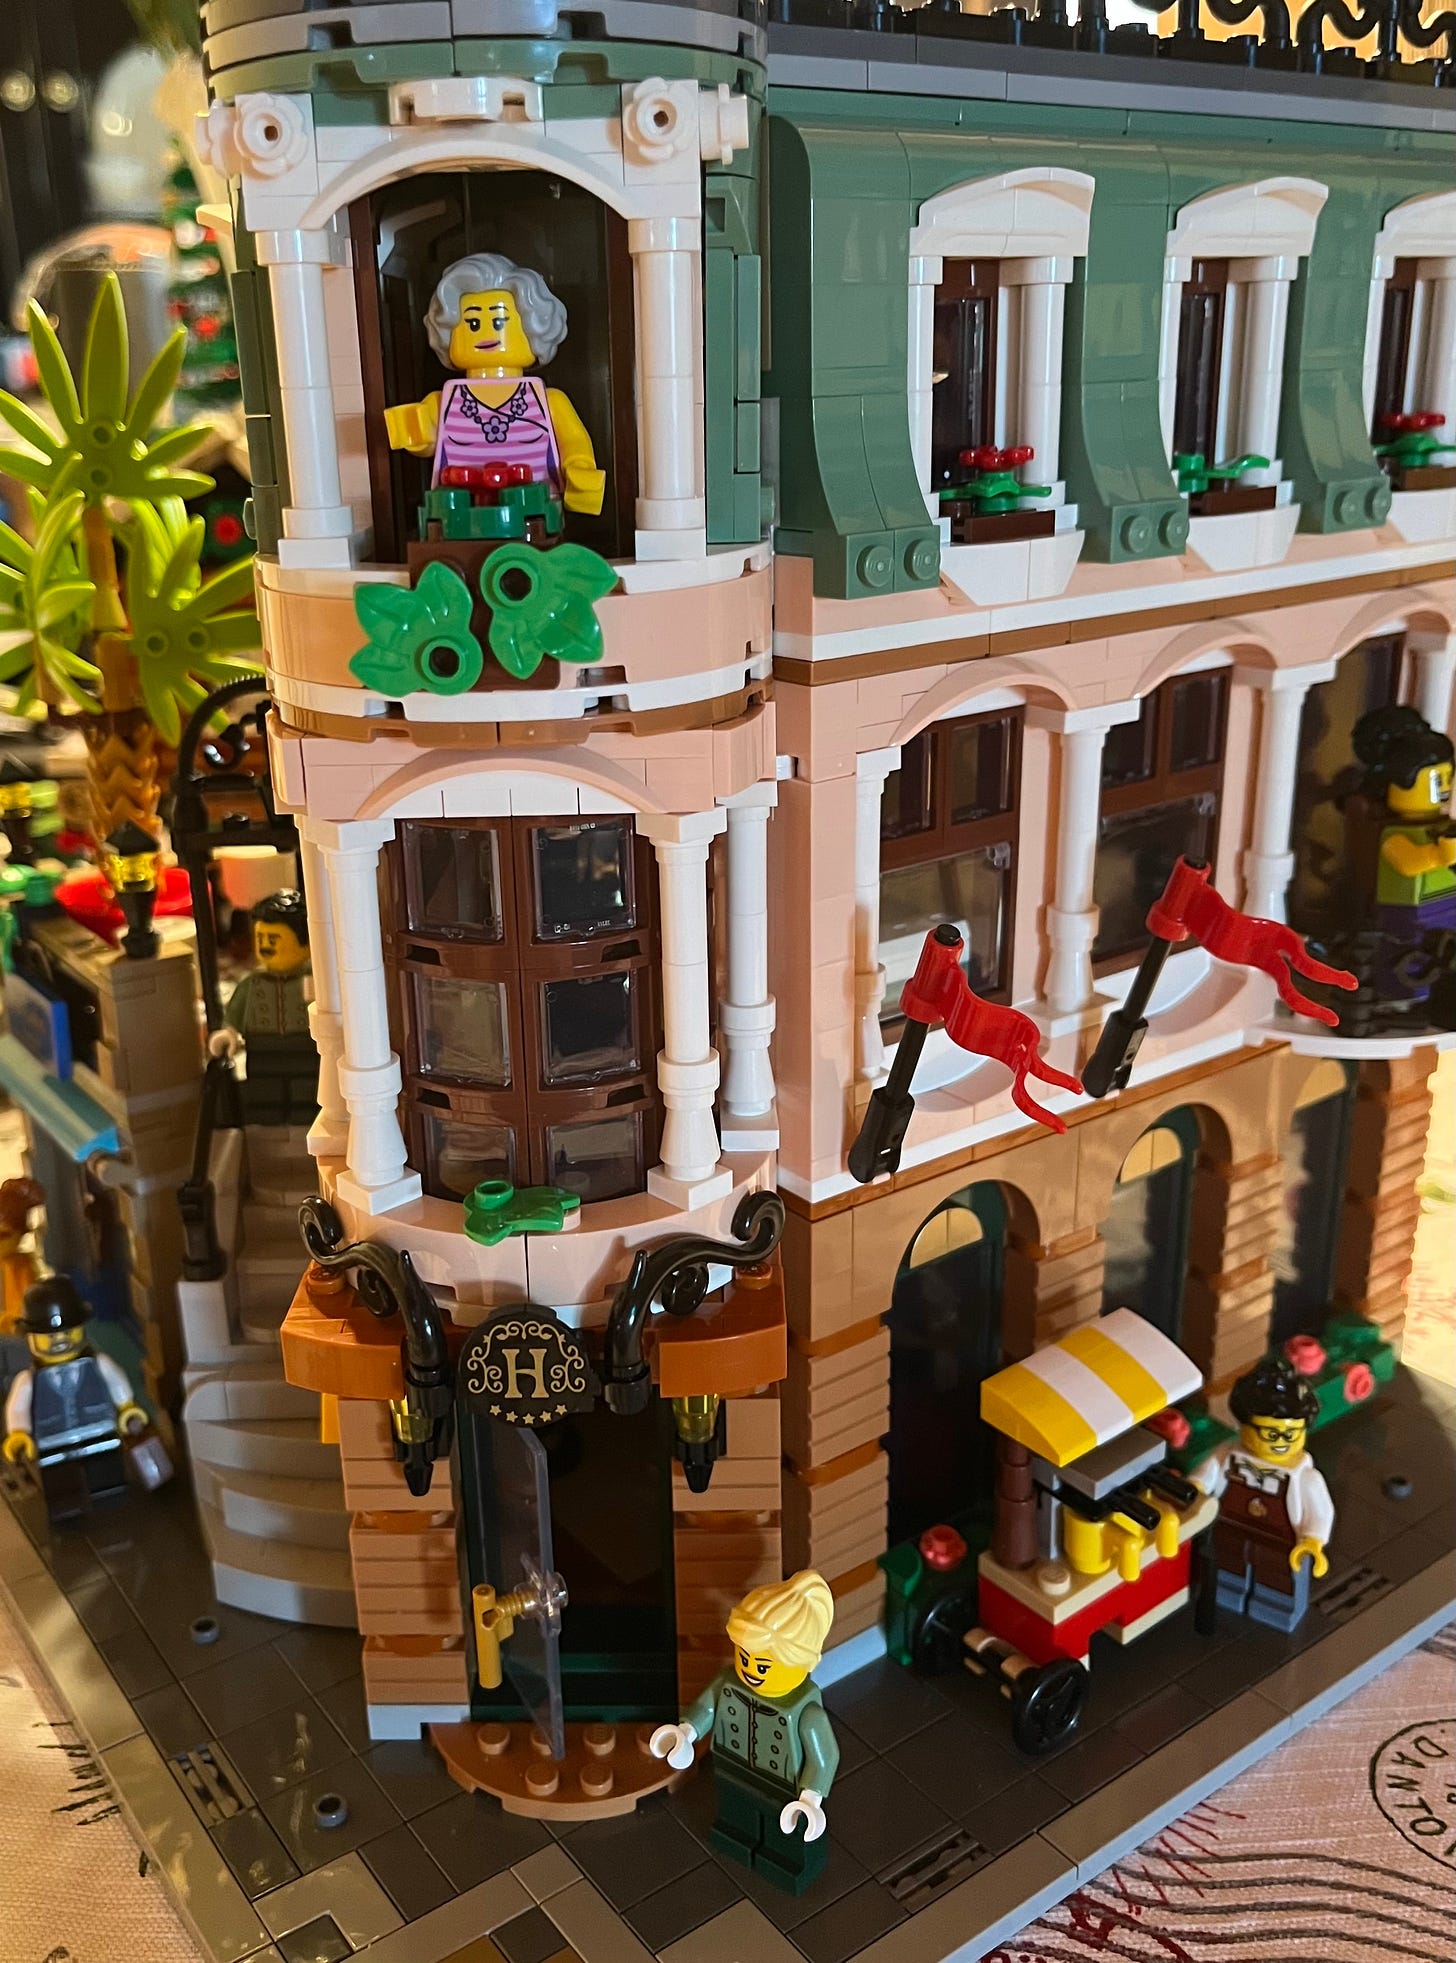 Photo of a LEGO build of a hotel made of pink and green pieces.